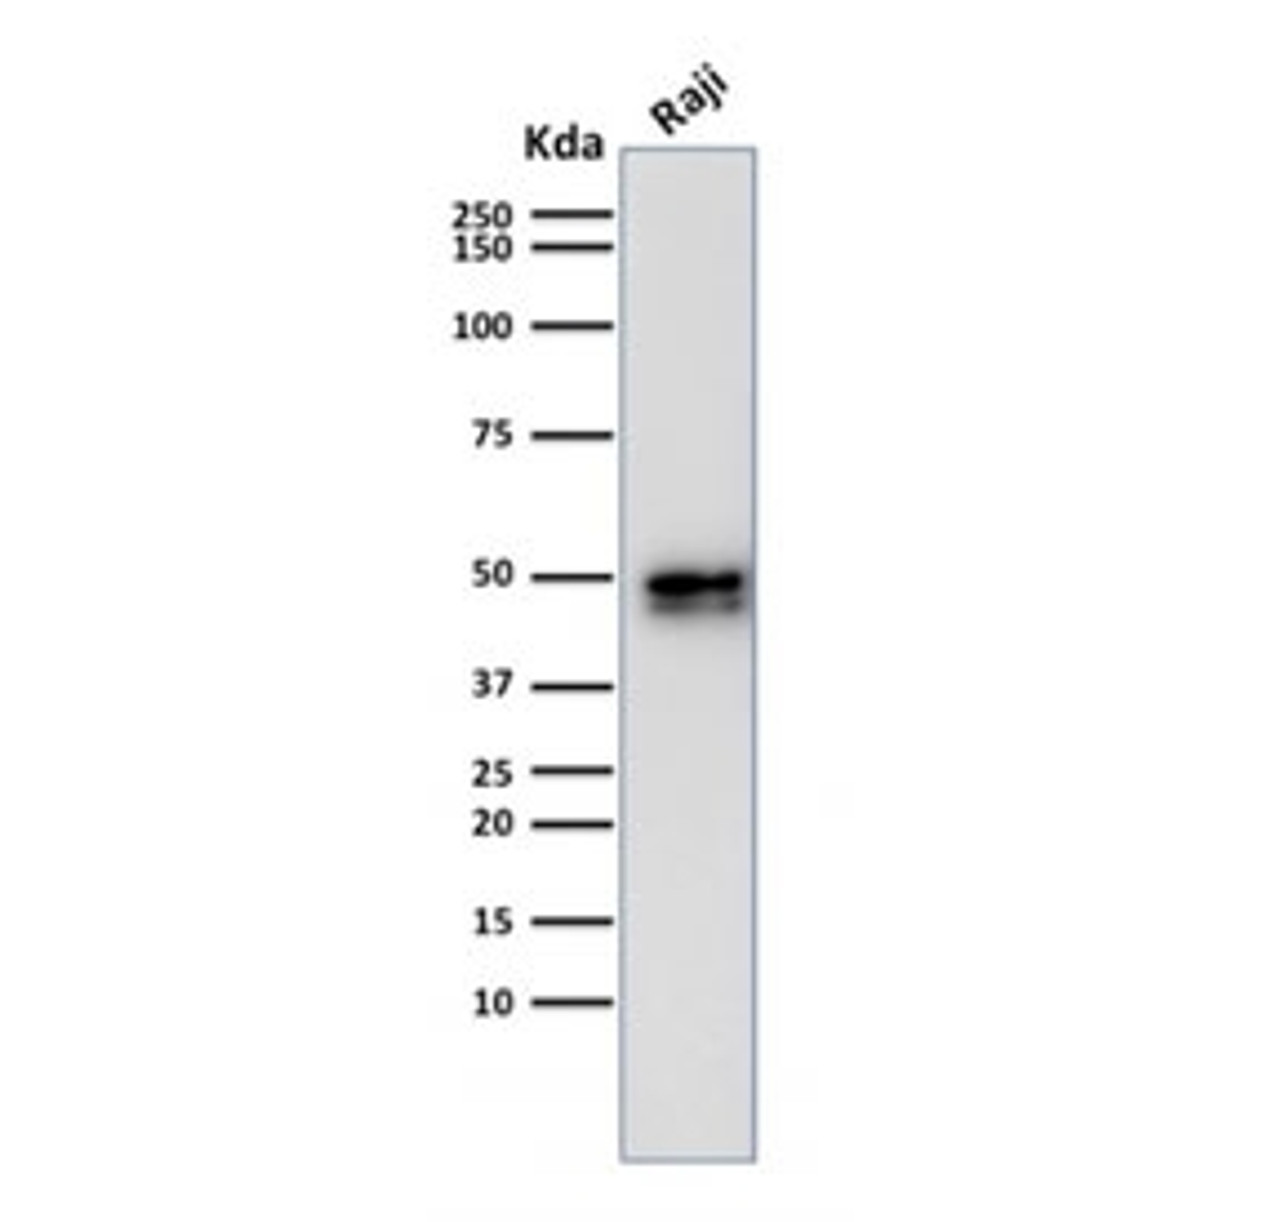 Western blot testing of human Raji cell lysate with recombinant CD79a antibody (clone IGA/1790R) . Expected molecular weight: 25-47 kDa depending on glycosylation level.